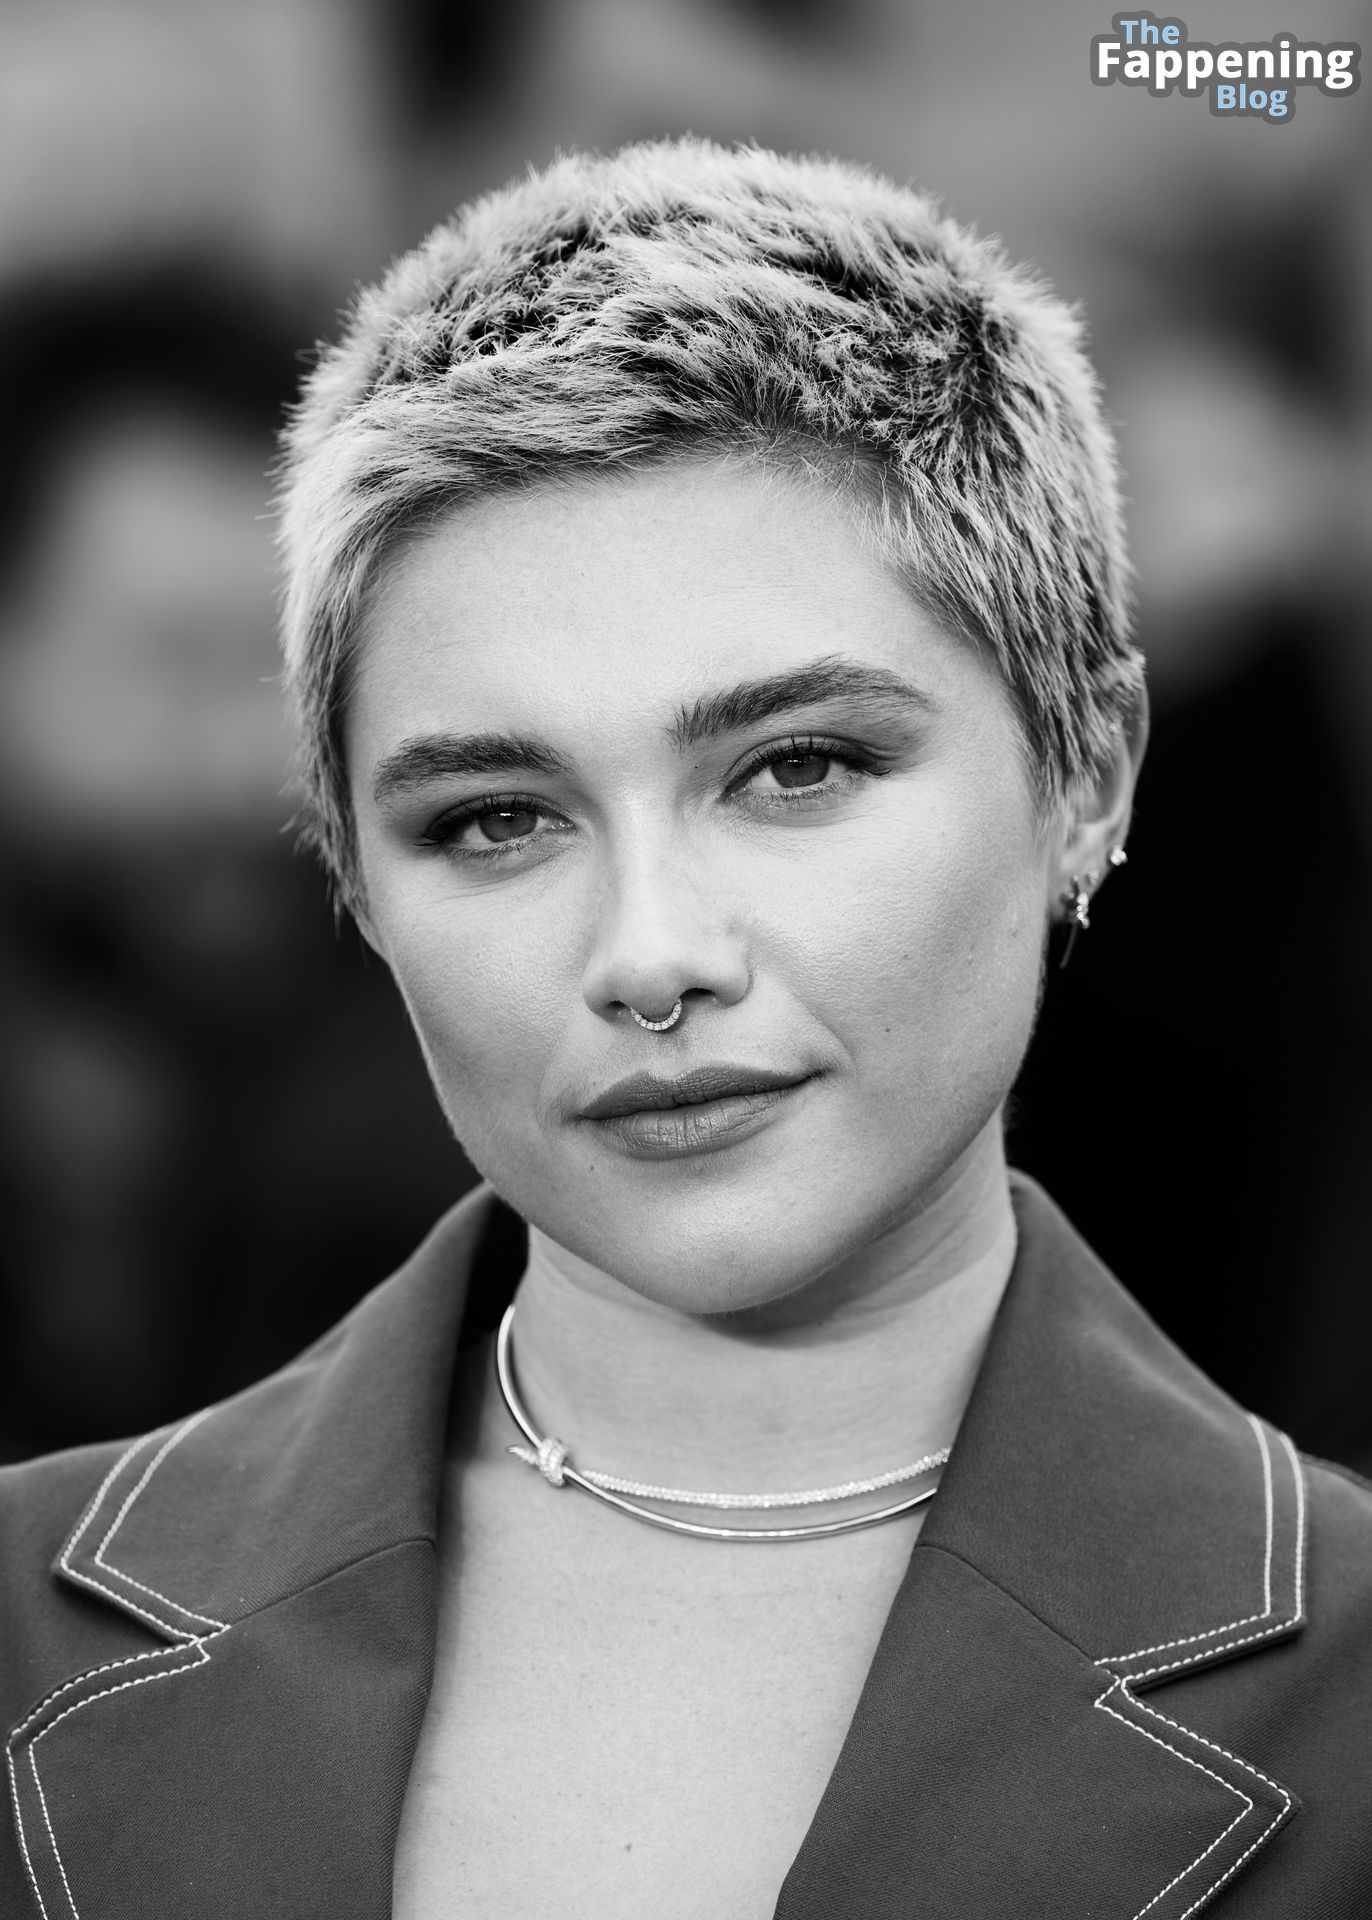 Florence-Pugh-Sexy-The-Fappening-Blog-11.jpg